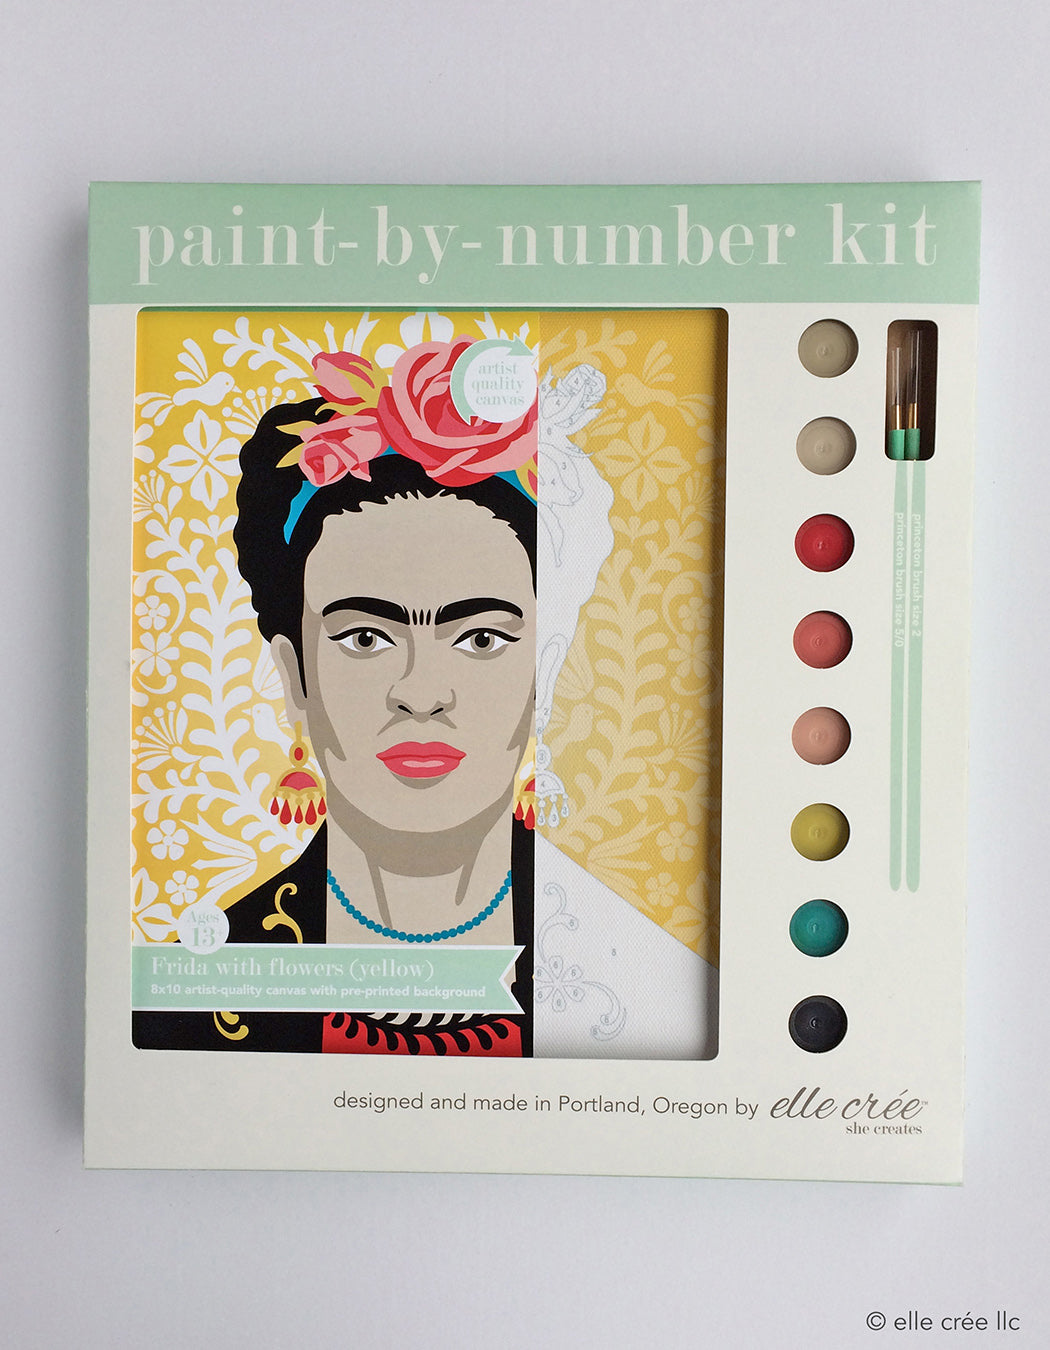 Frida Kahlo Accessories for Sale